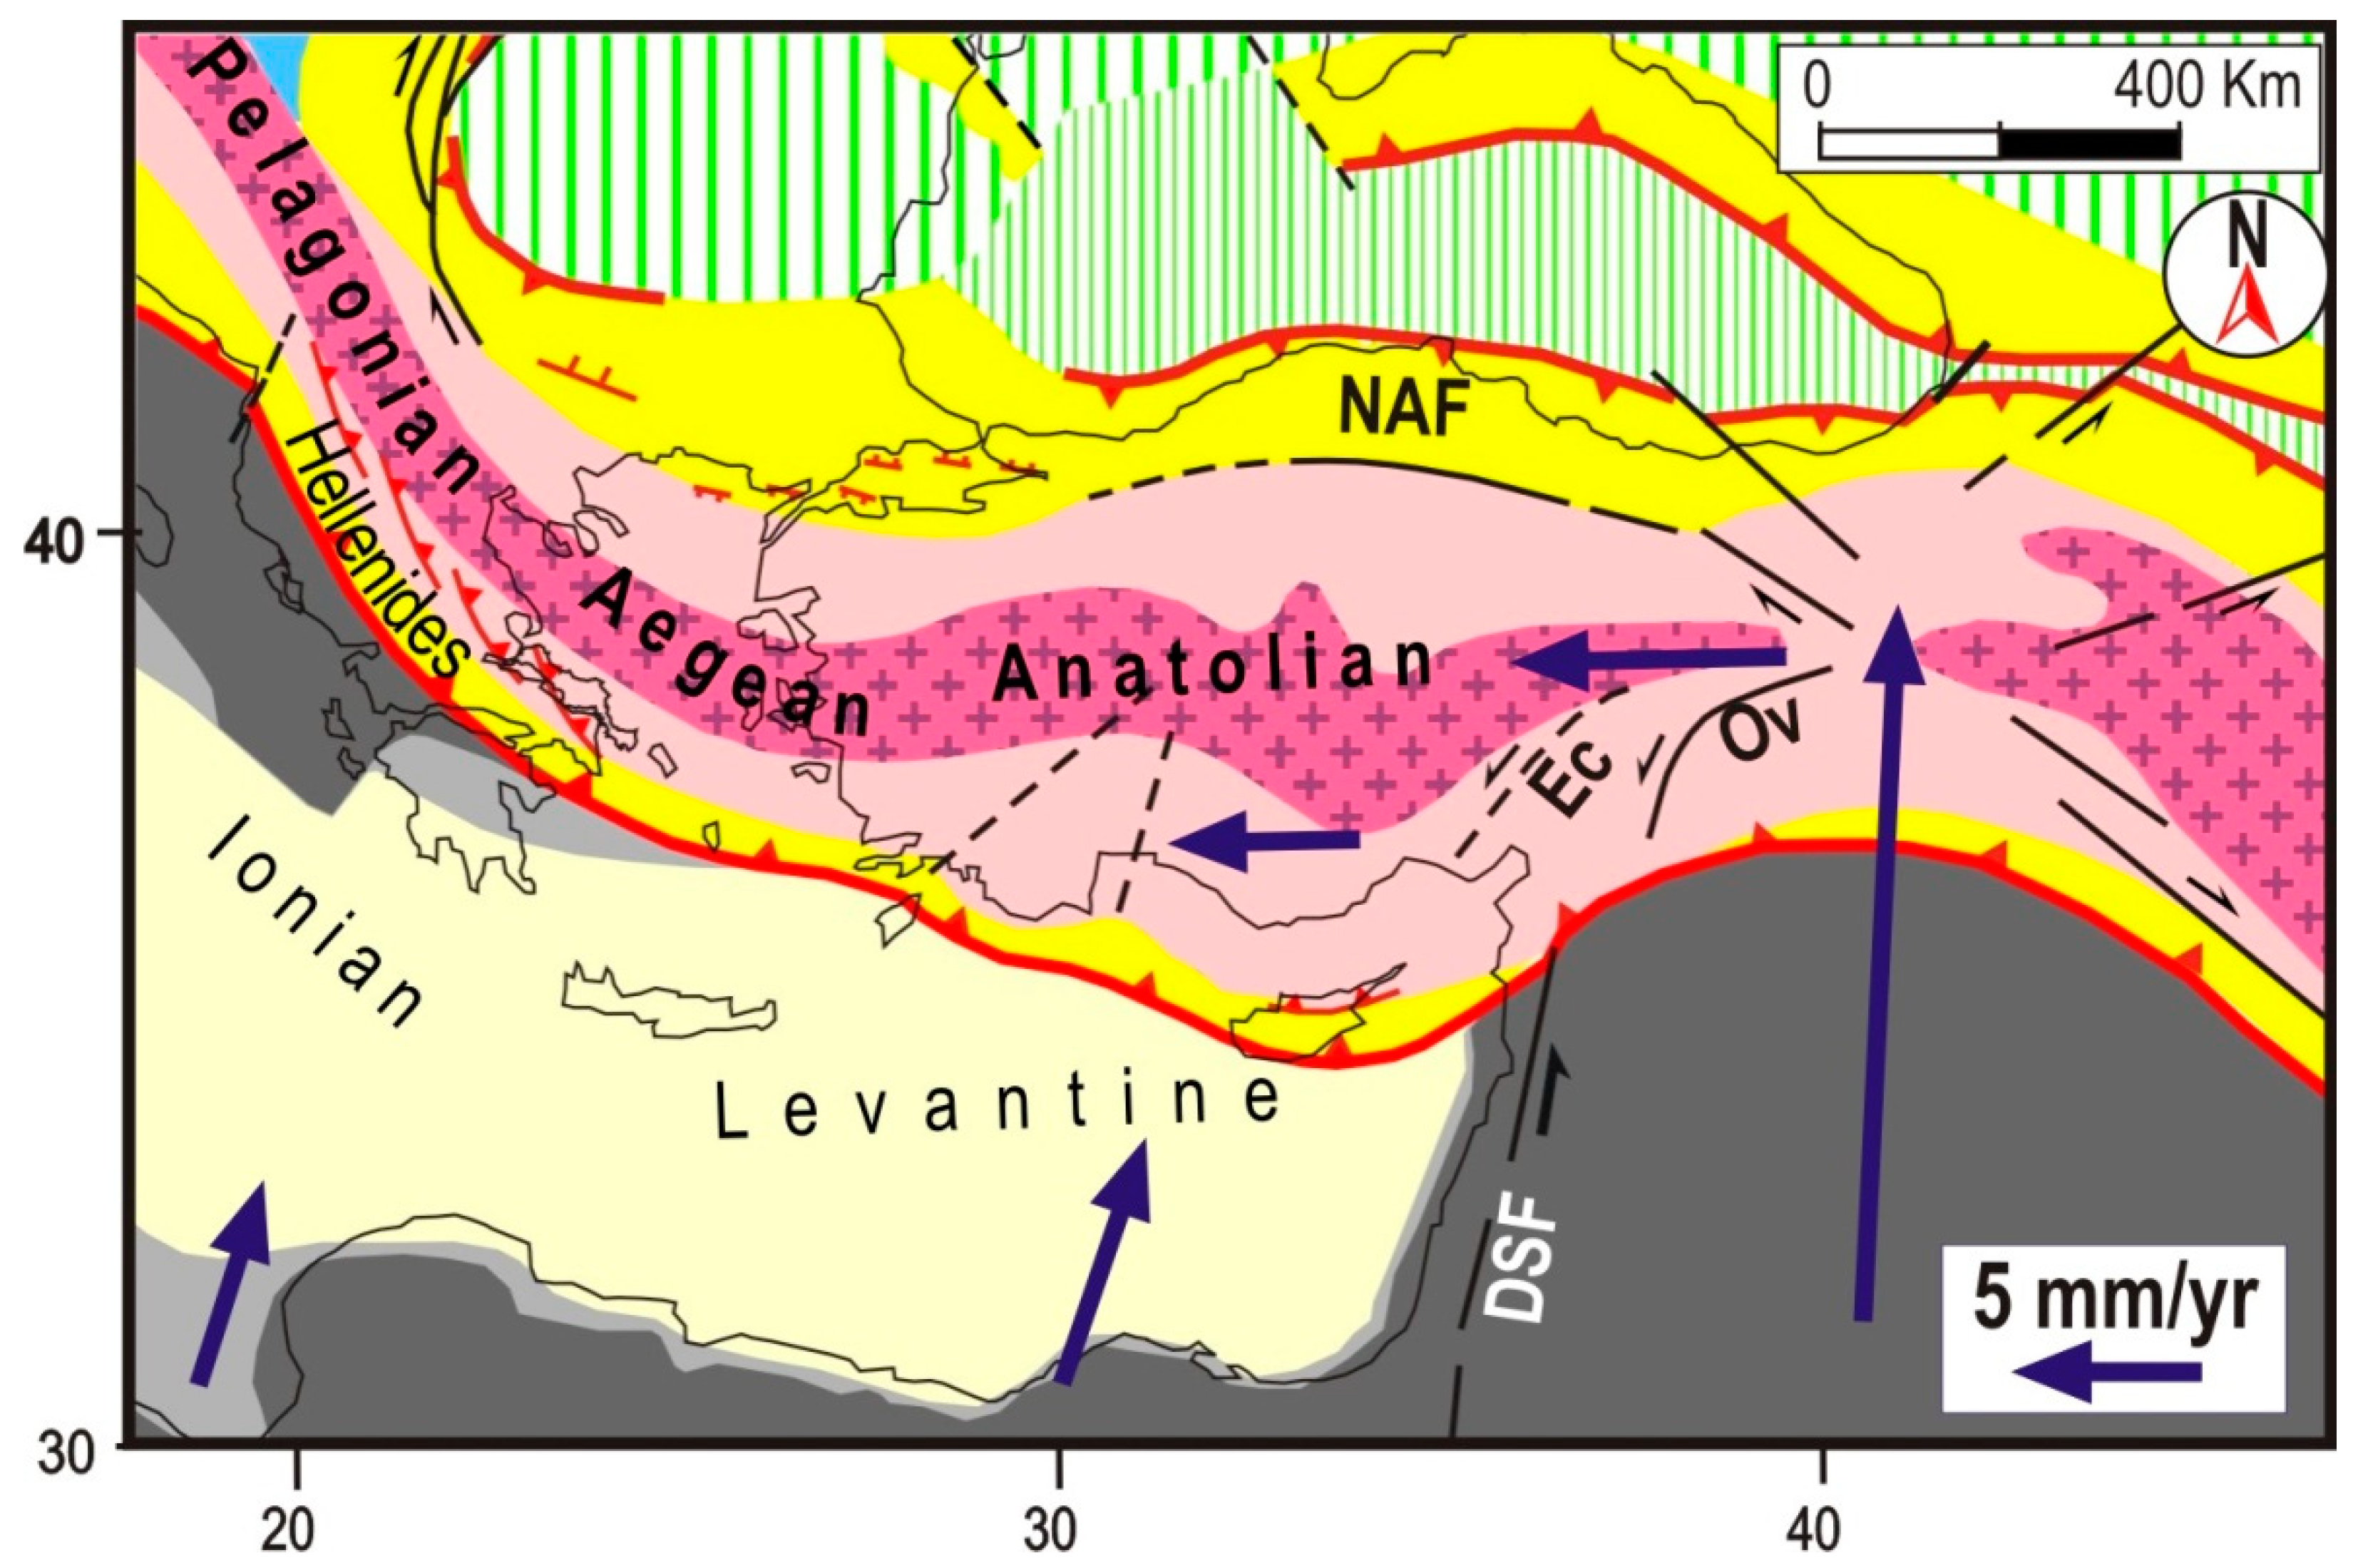 PDF) Late Miocene shortening of the Northern Apennines back-arc